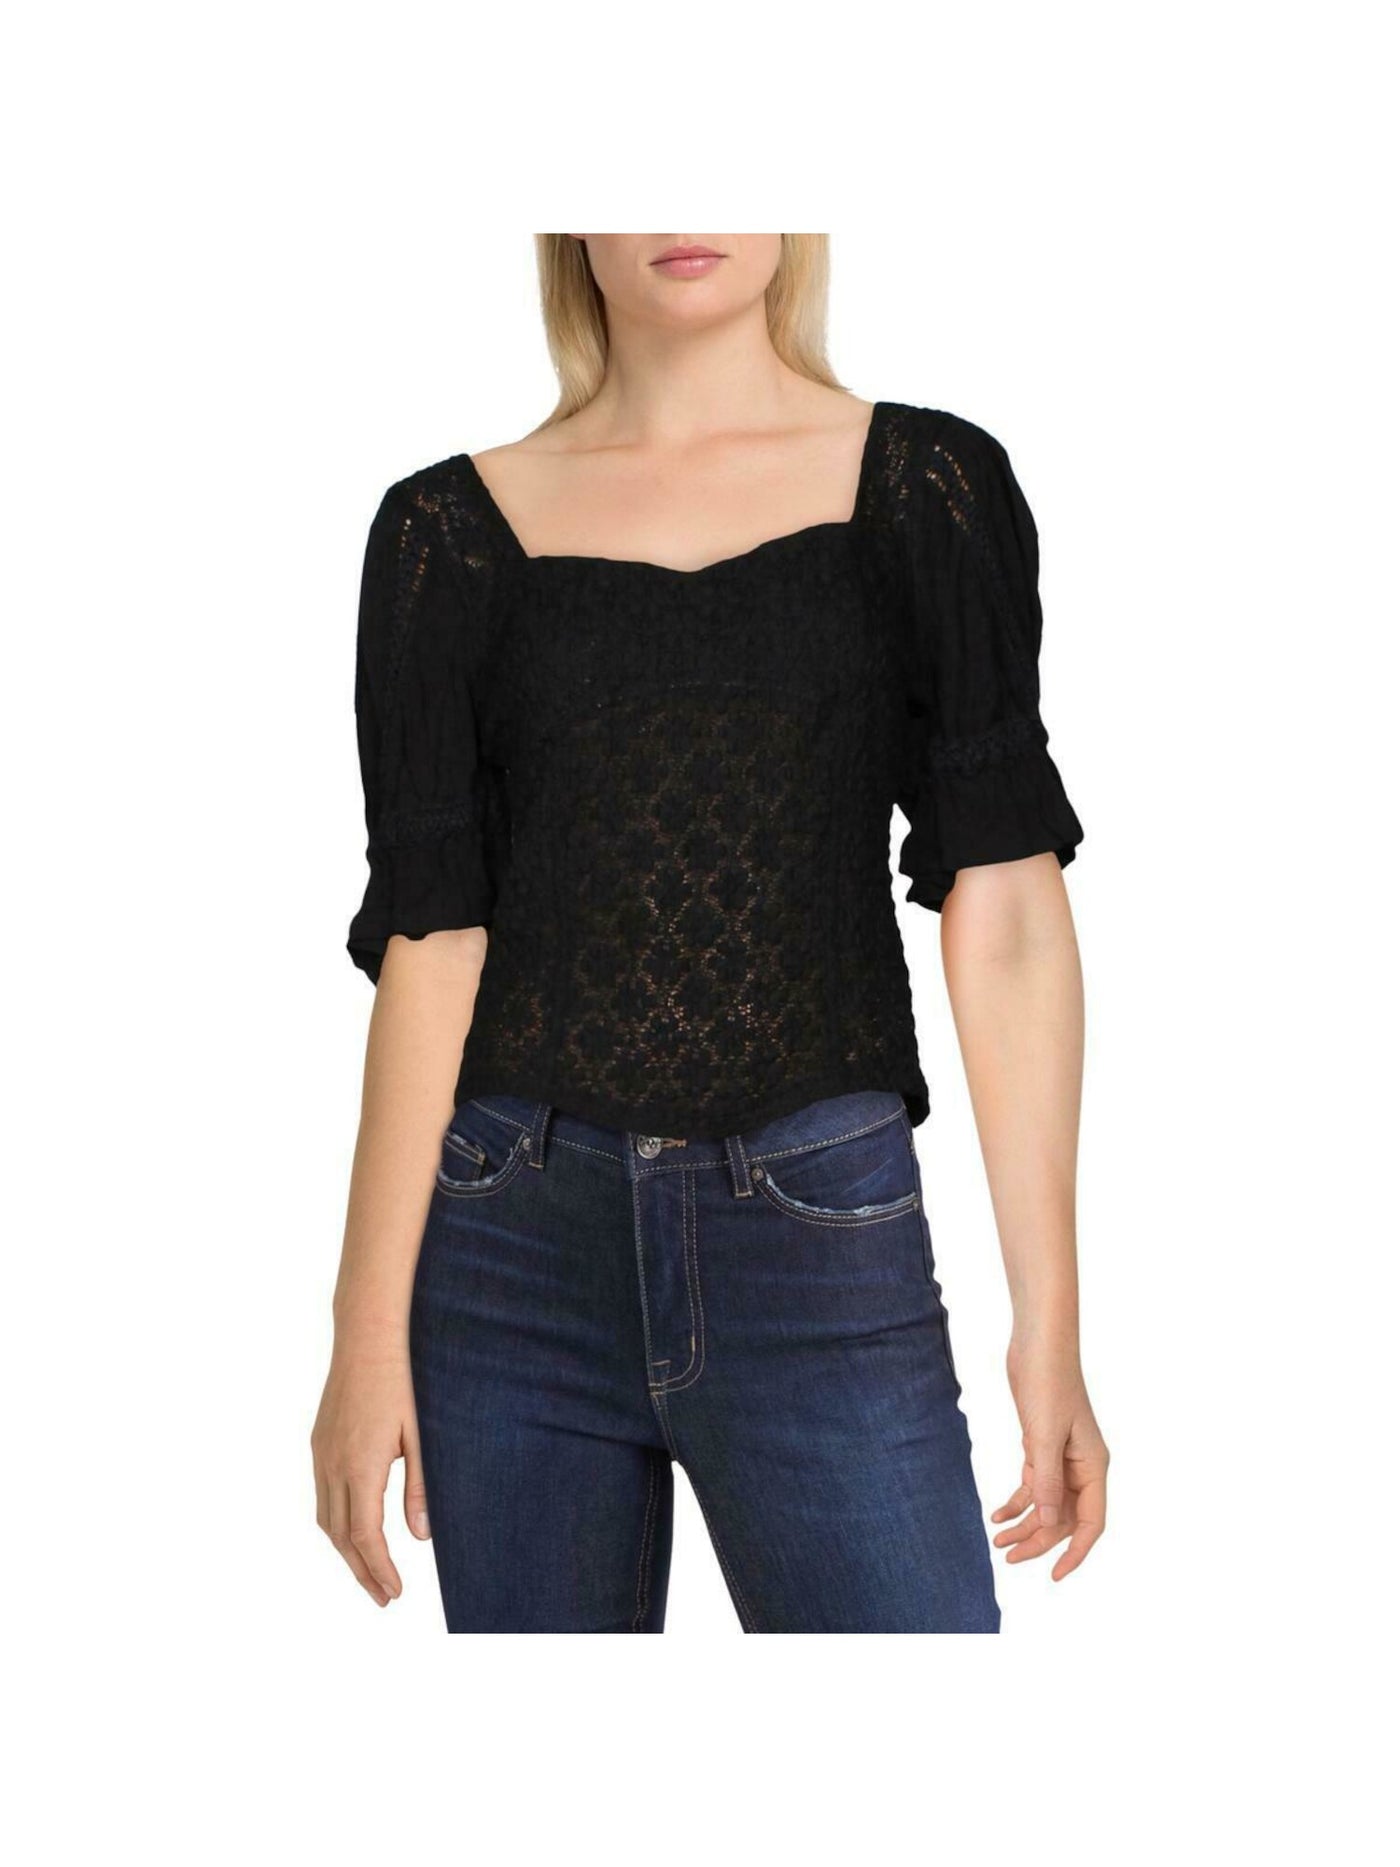 FREE PEOPLE Womens Black Lace Ruffled Short Sleeve Square Neck Top S